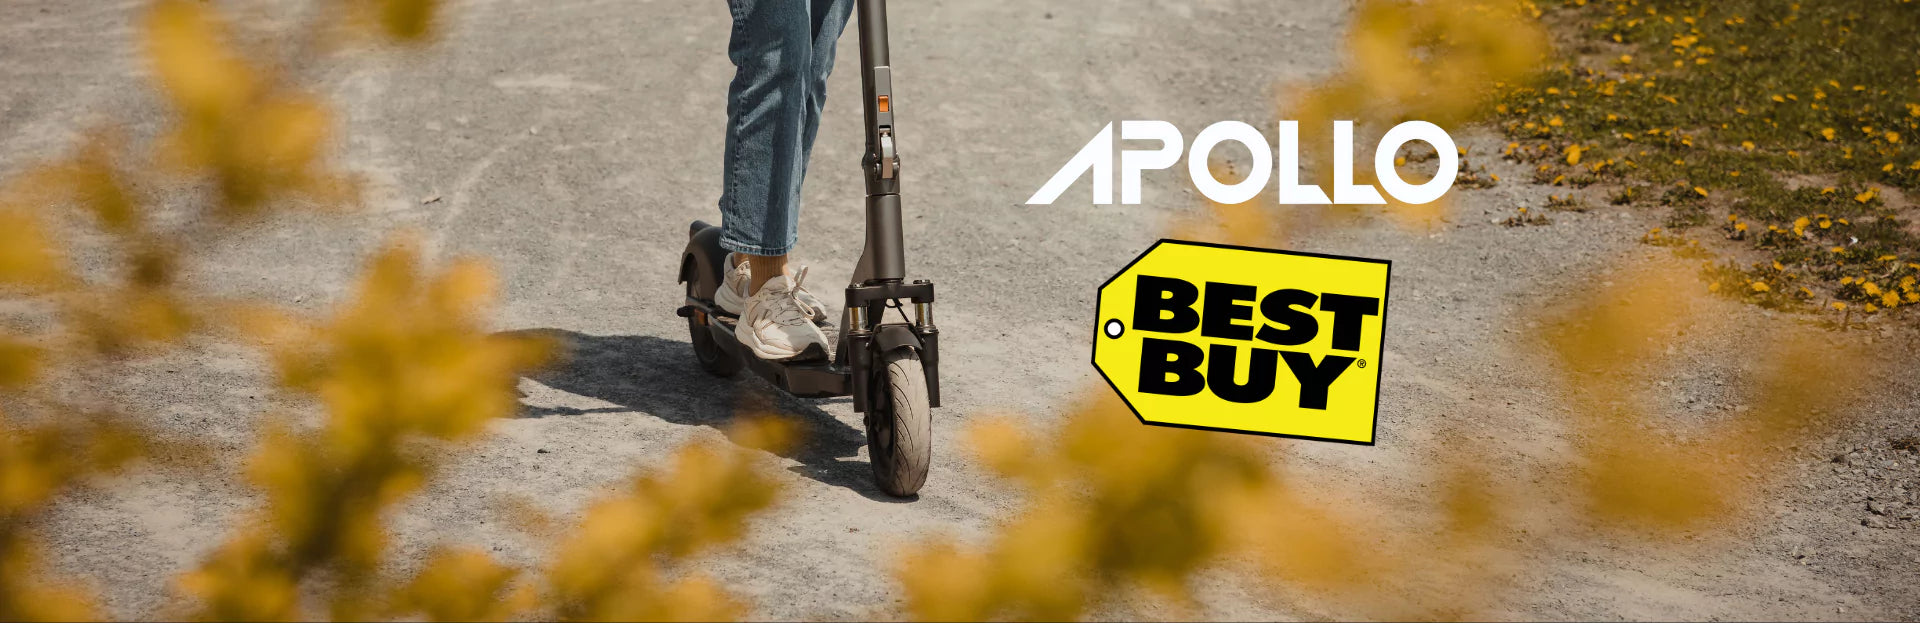 PRESS RELEASE: Apollo Scooter Announces Exciting Distribution Partnership with Best Buy USA